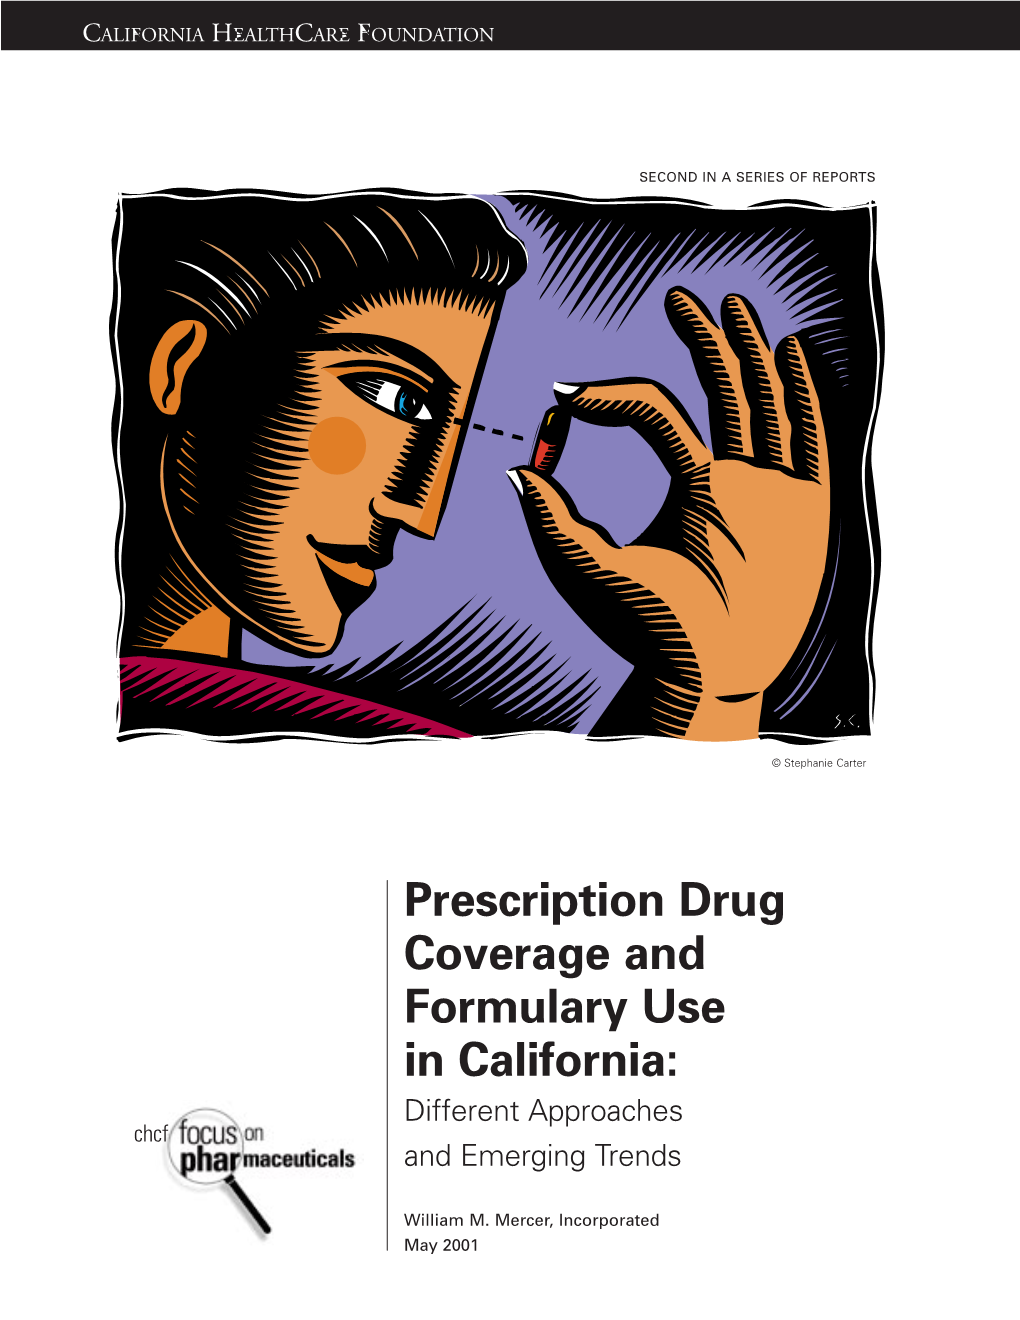 Prescription Drug Coverage and Formulary Use in California: Different Approaches and Emerging Trends